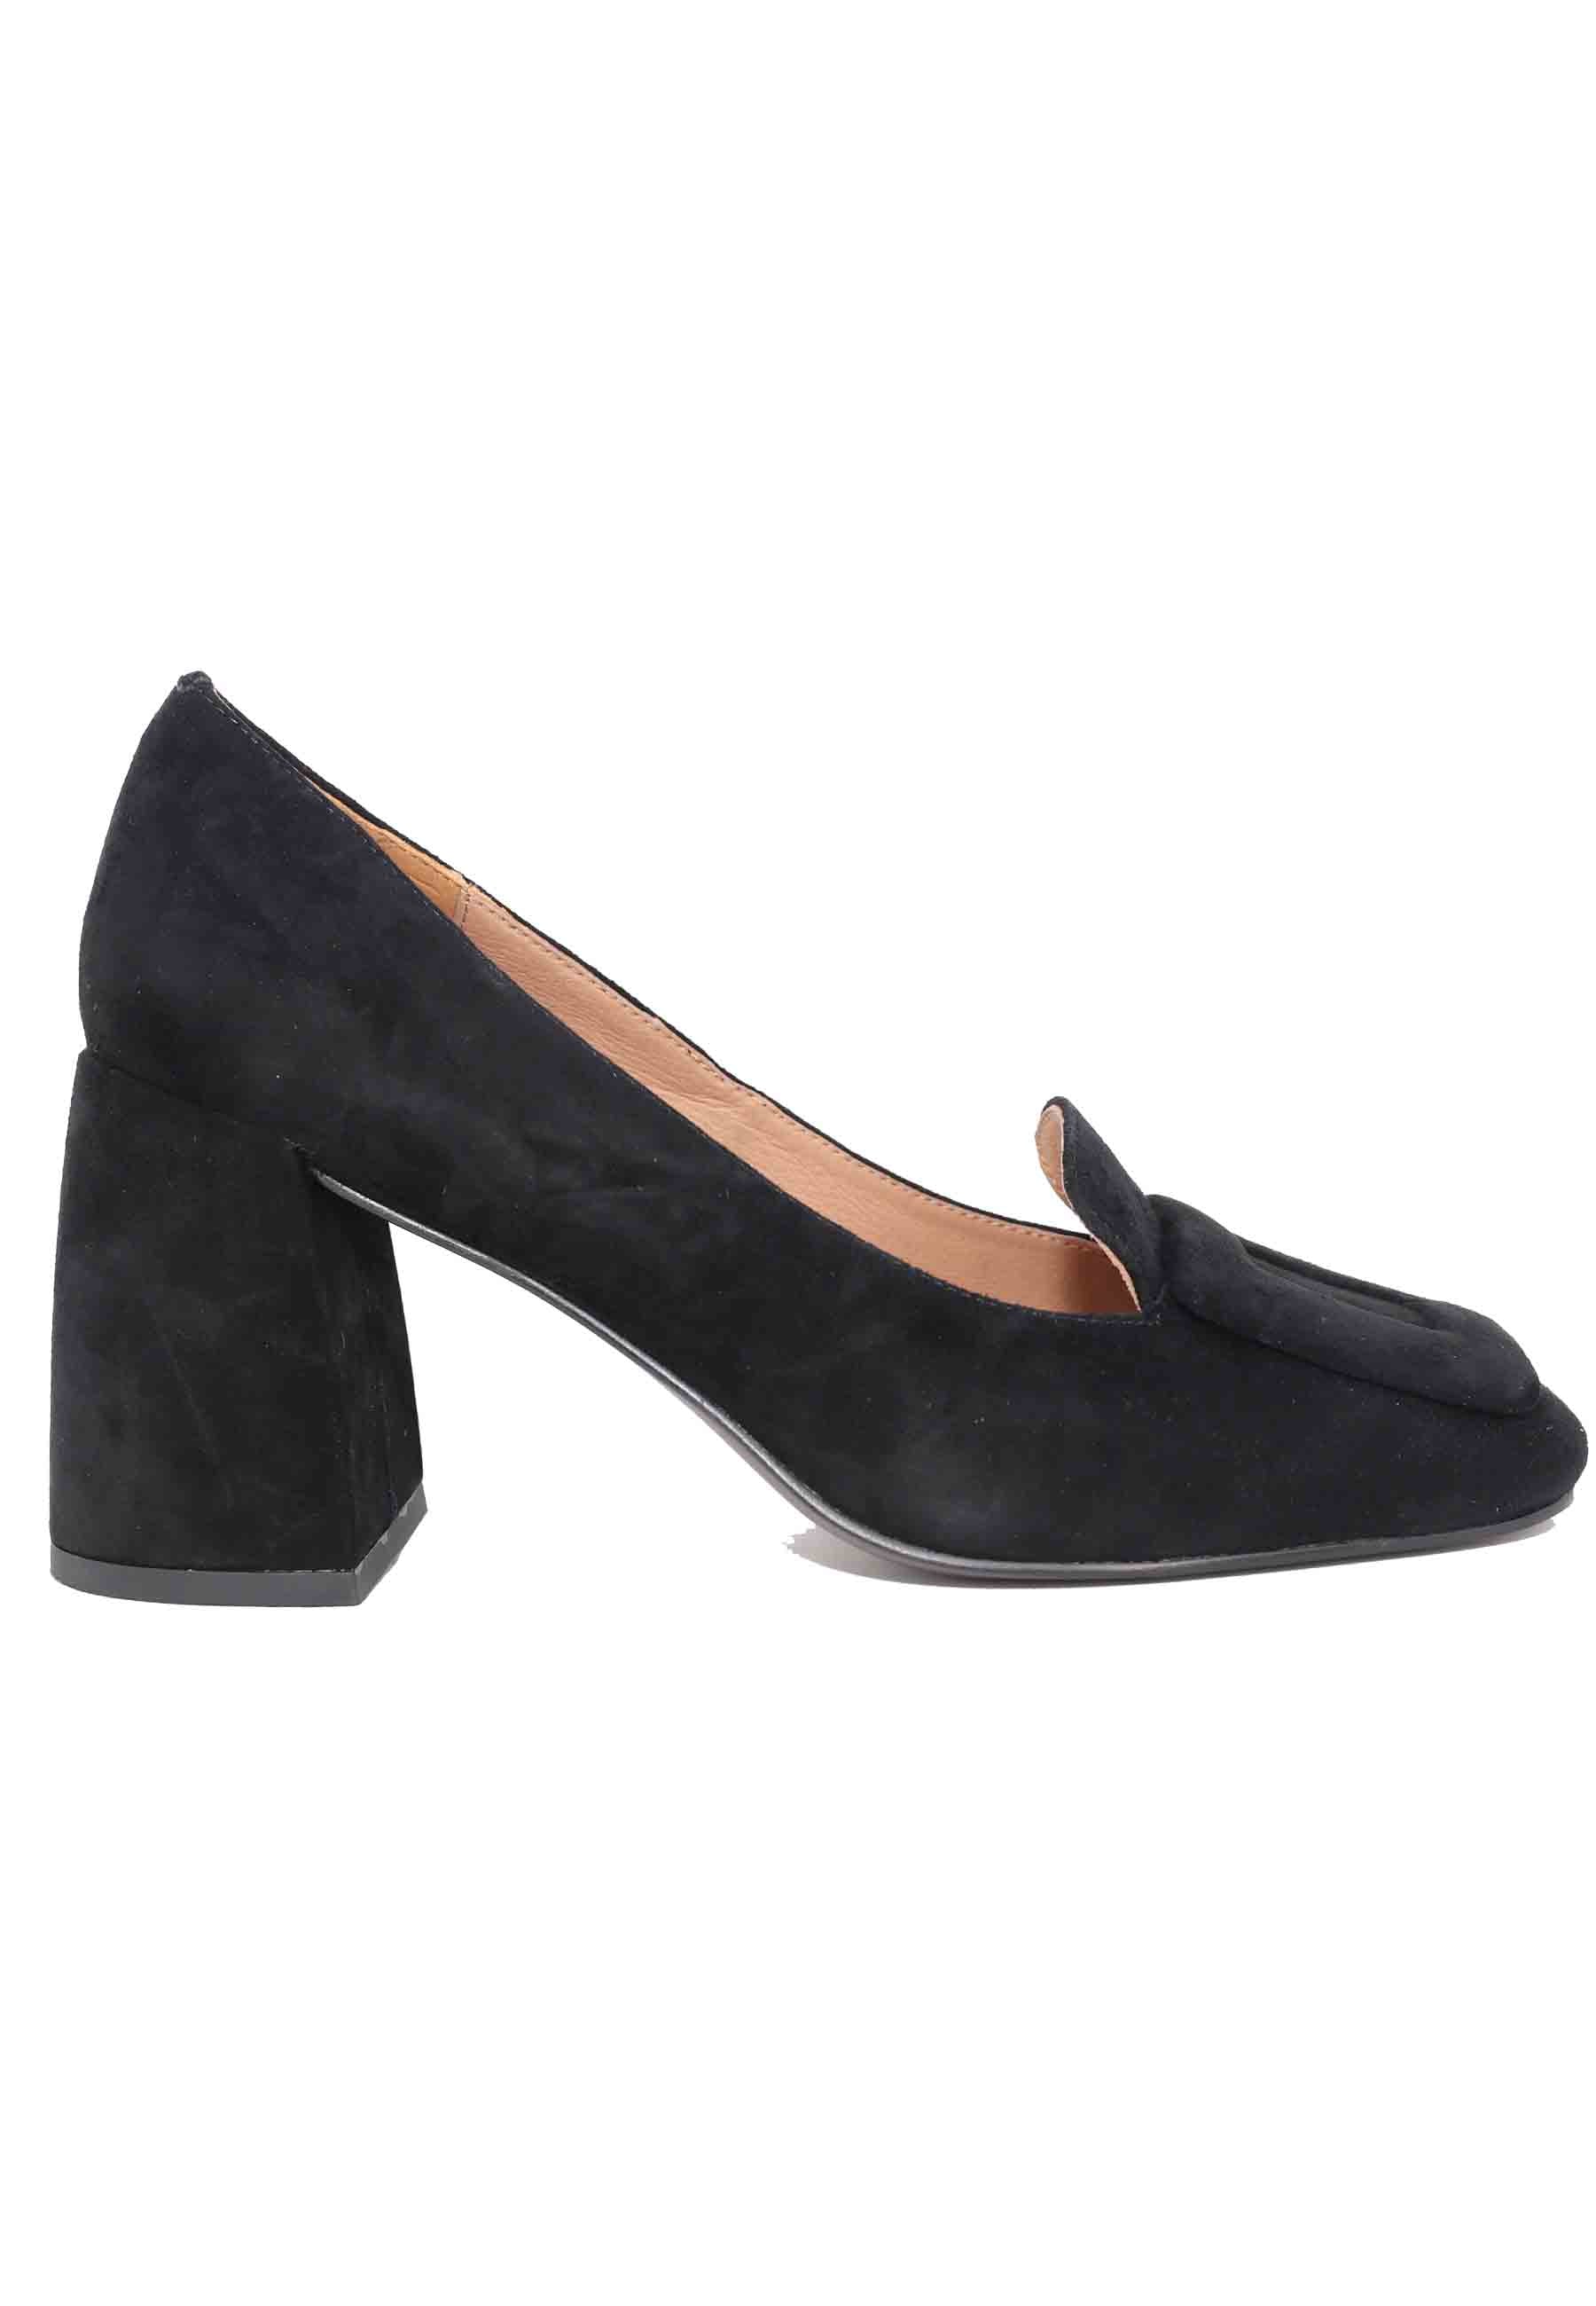 Women's loafers in black suede with square toe and Marla-coloured buckle